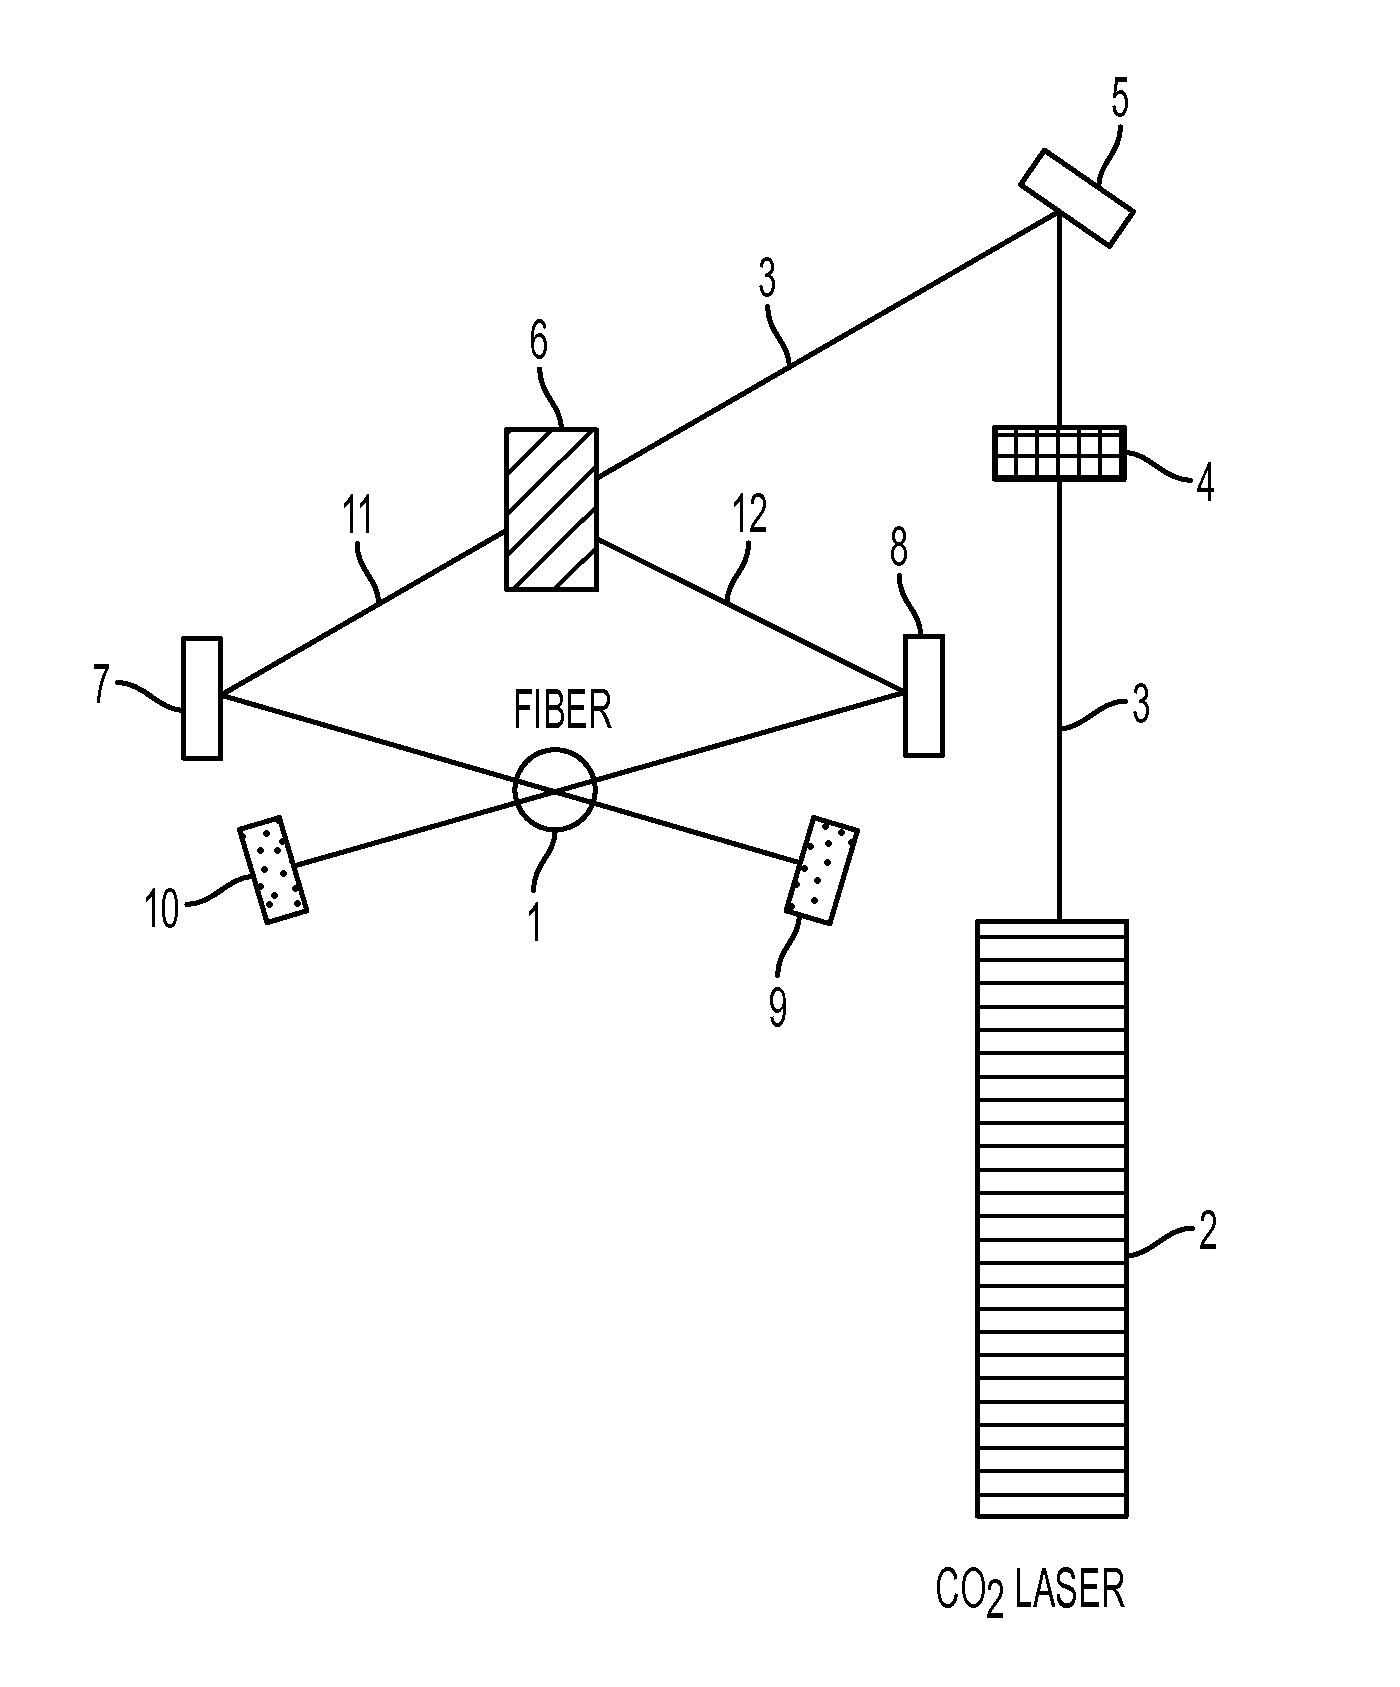 Optical fiber processing system using a co2 laser